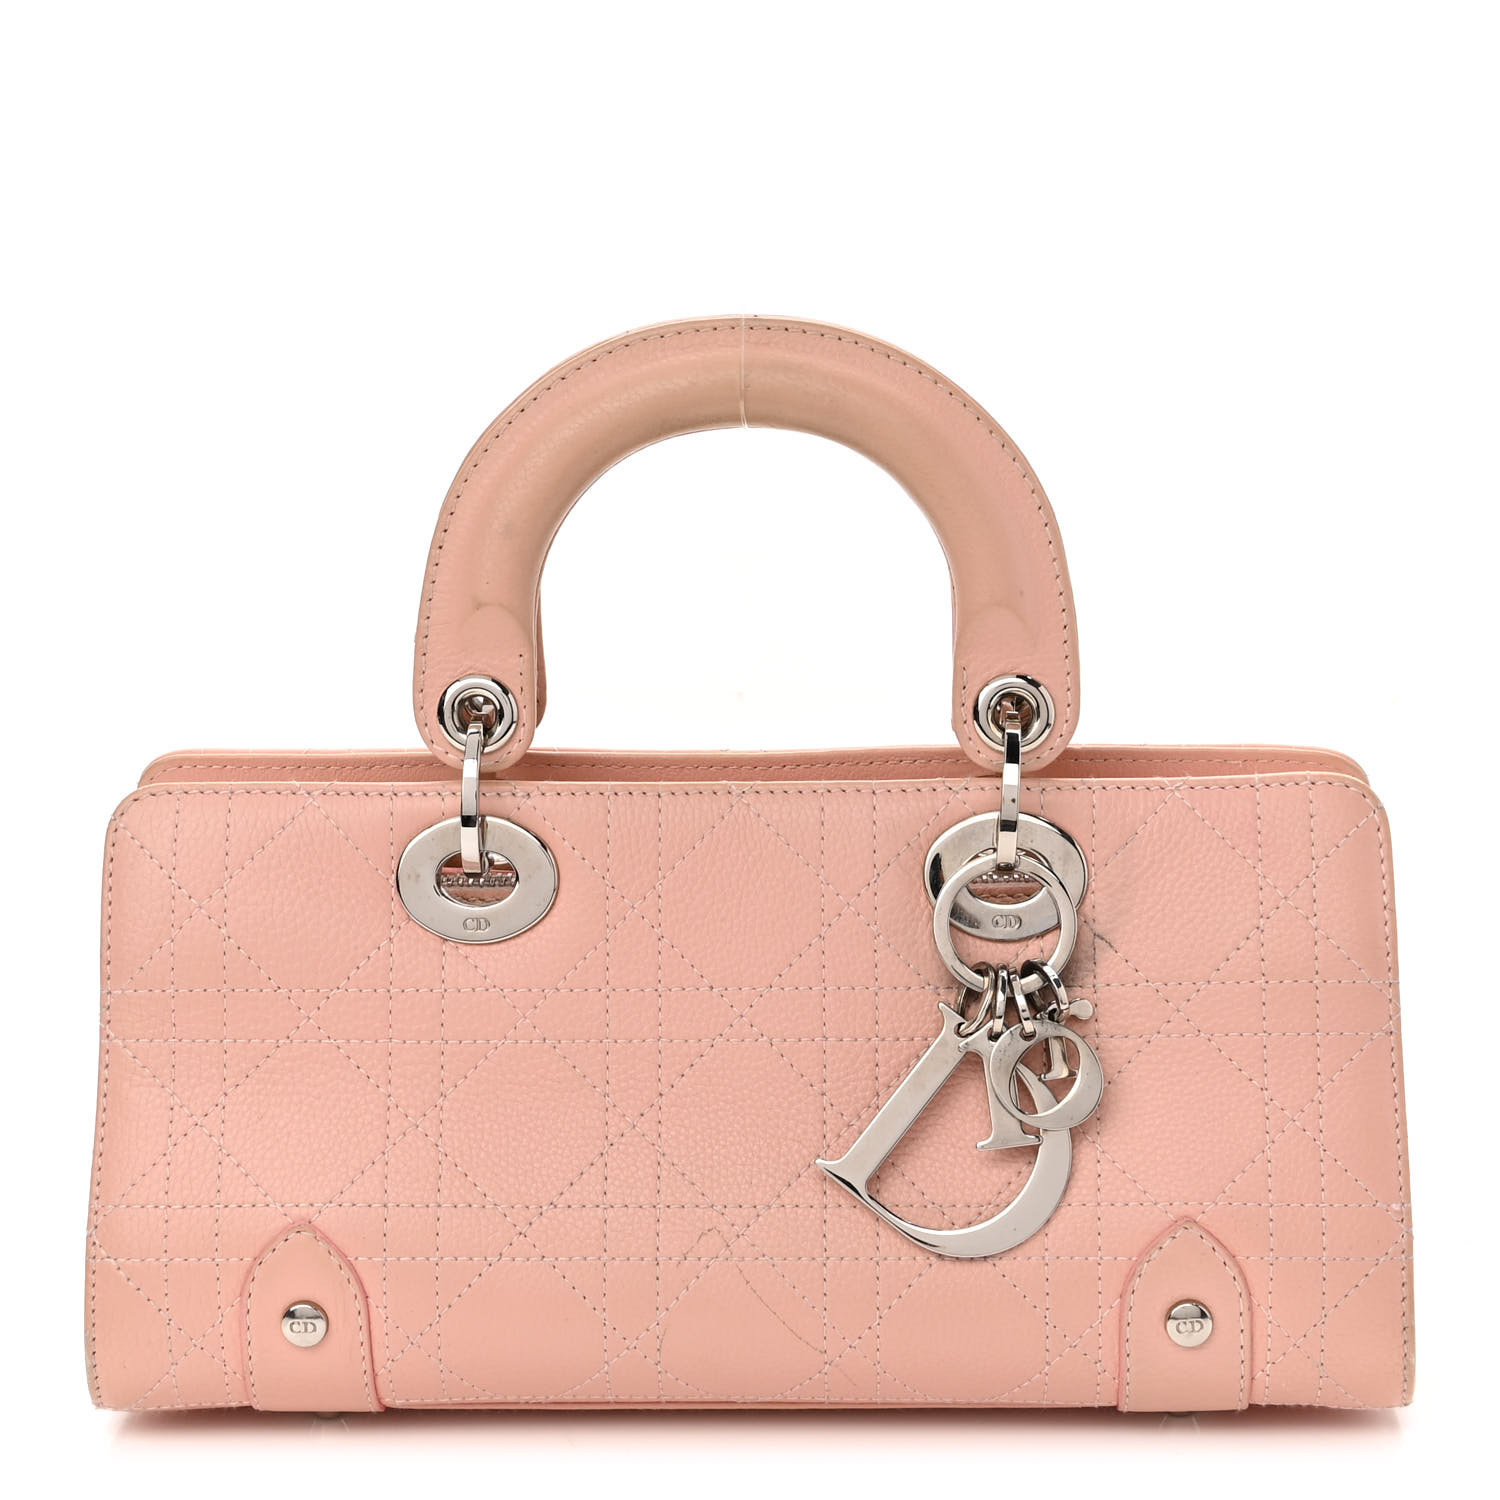 CHRISTIAN DIOR Calfskin Cannage Stitched Small East West Lady Dior in the color Rose Clair by FASHIONPHILE